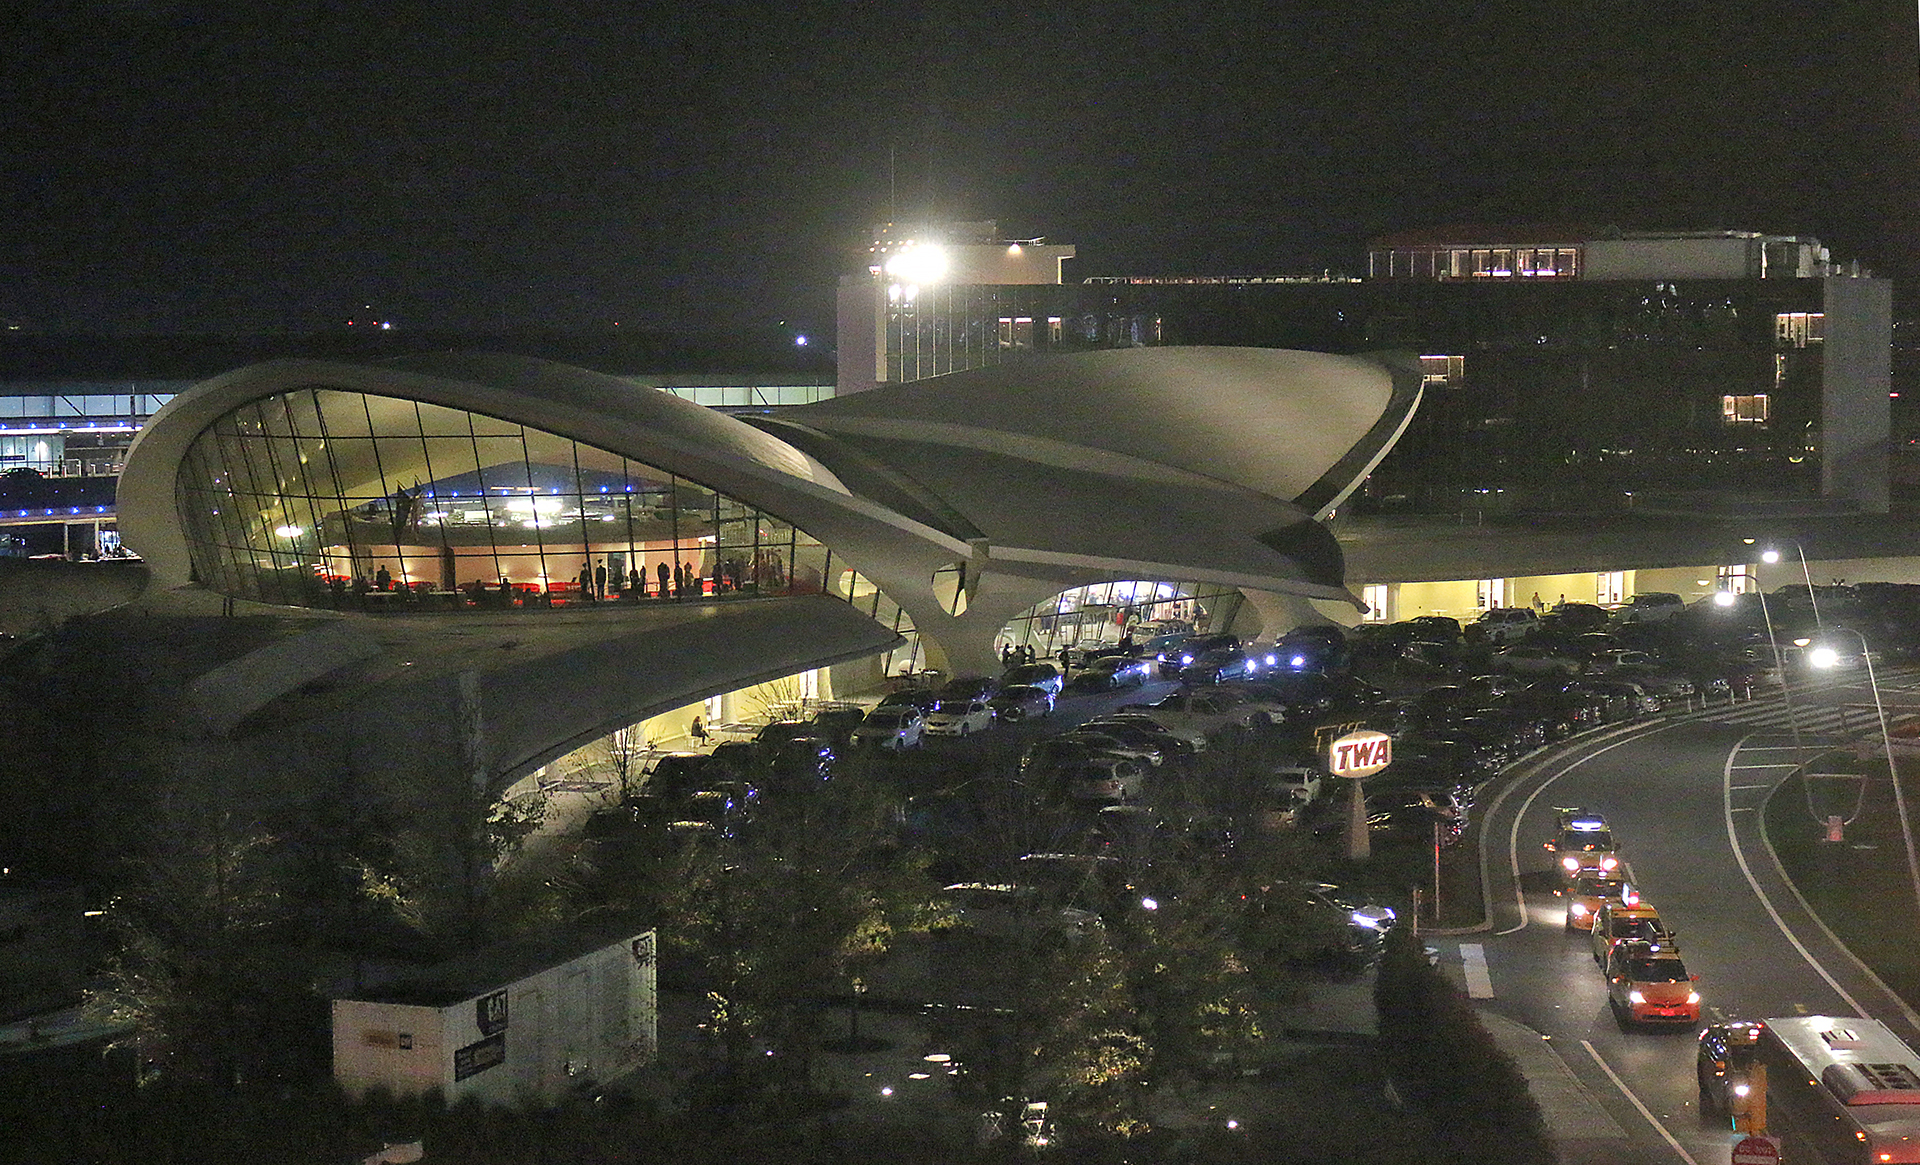 a building with a curved roof and a parking lot with cars parked in front